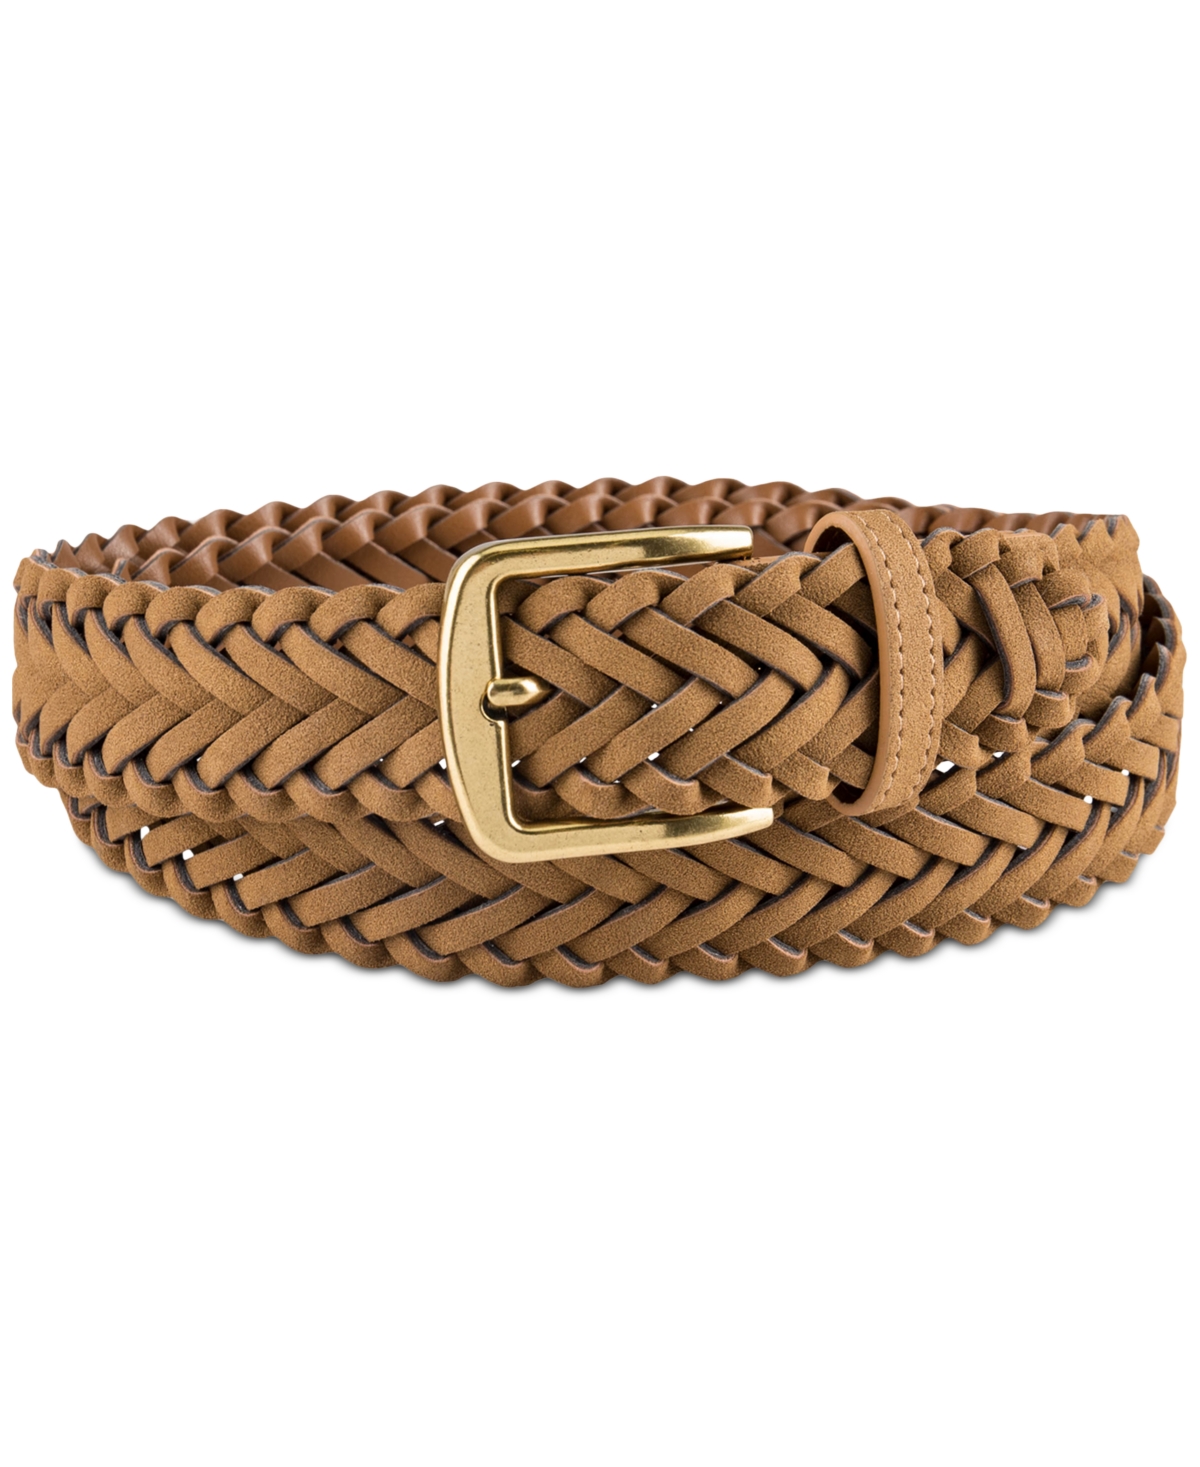 Club Room Men's Faux-Suede Braided Belt, Created for Macy's